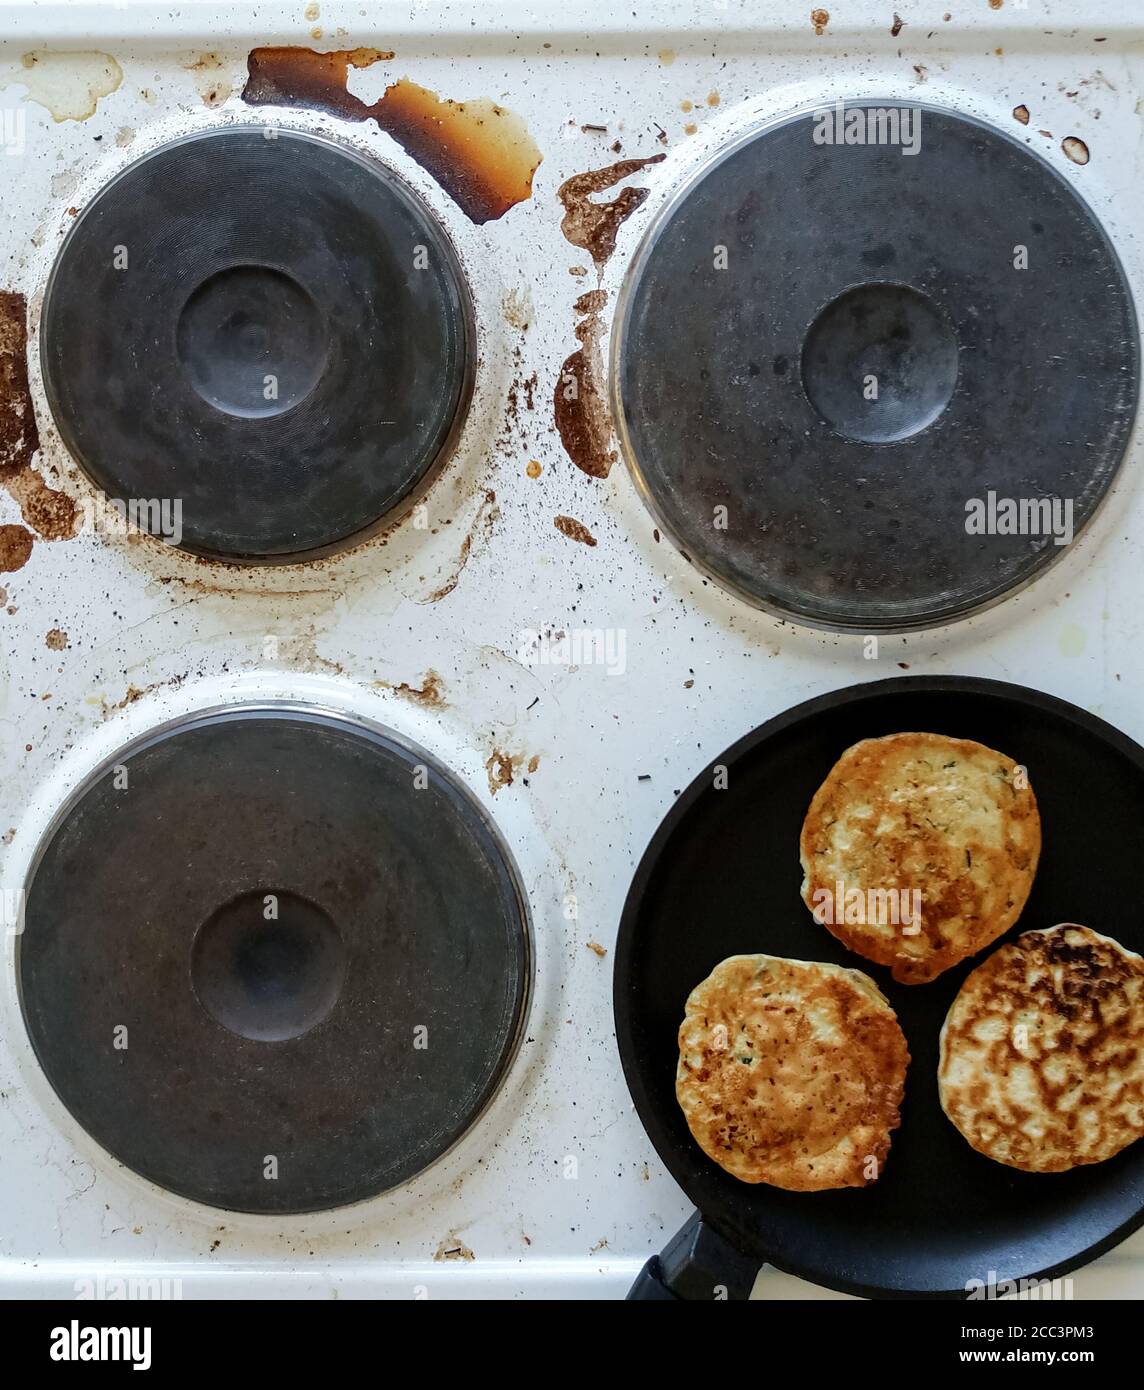 kitchen stove dirty with burnt food and cooking oil, frying pan with pancakes on top Stock Photo